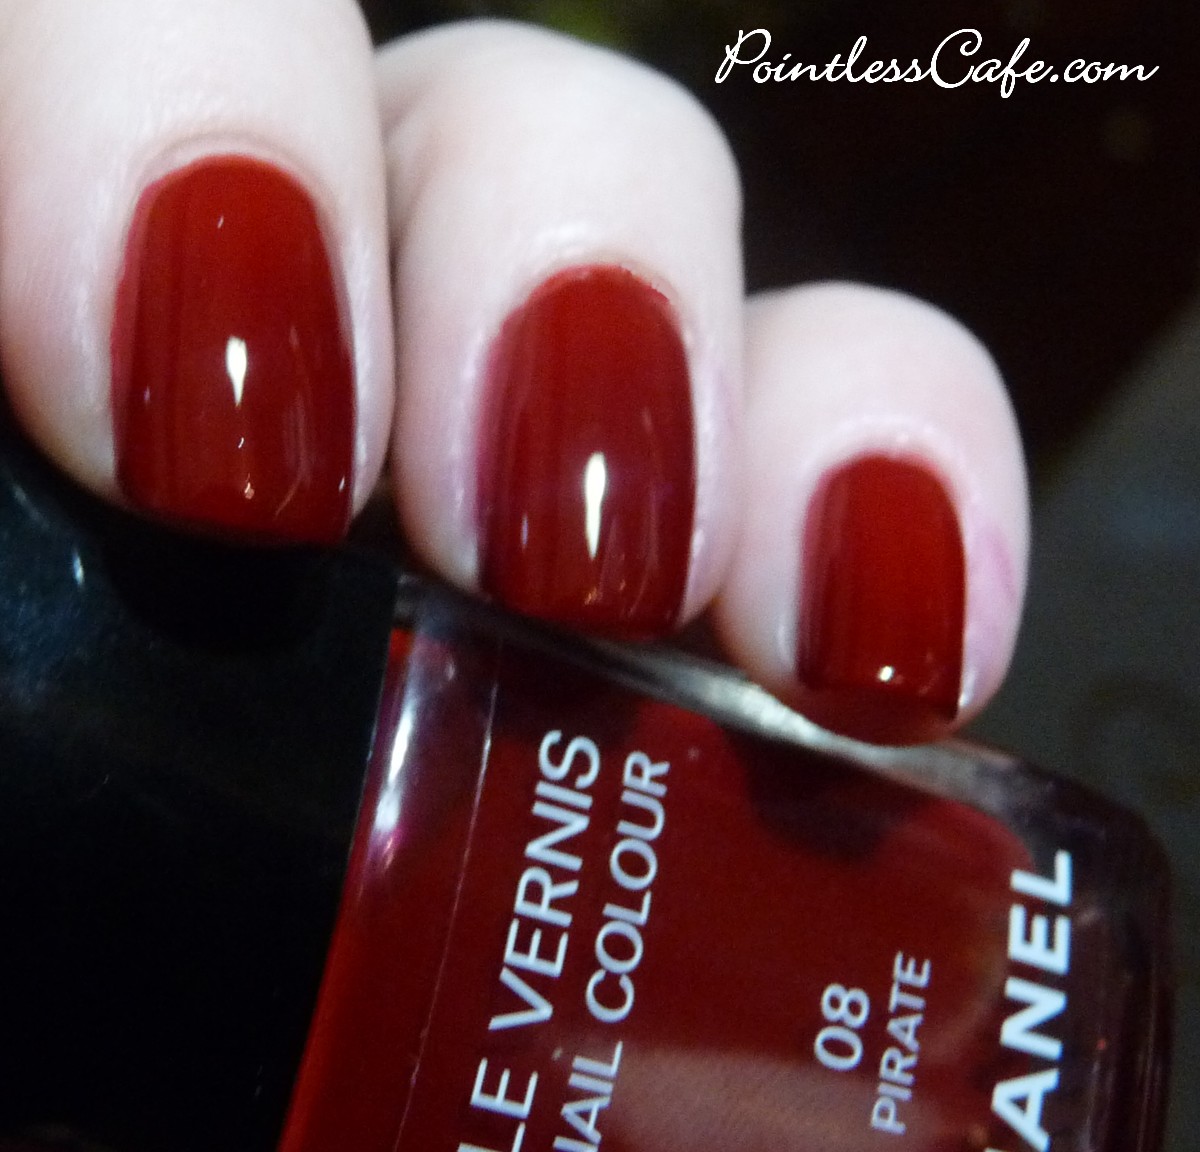 Chanel Pirate Swatches and Review | Pointless Cafe